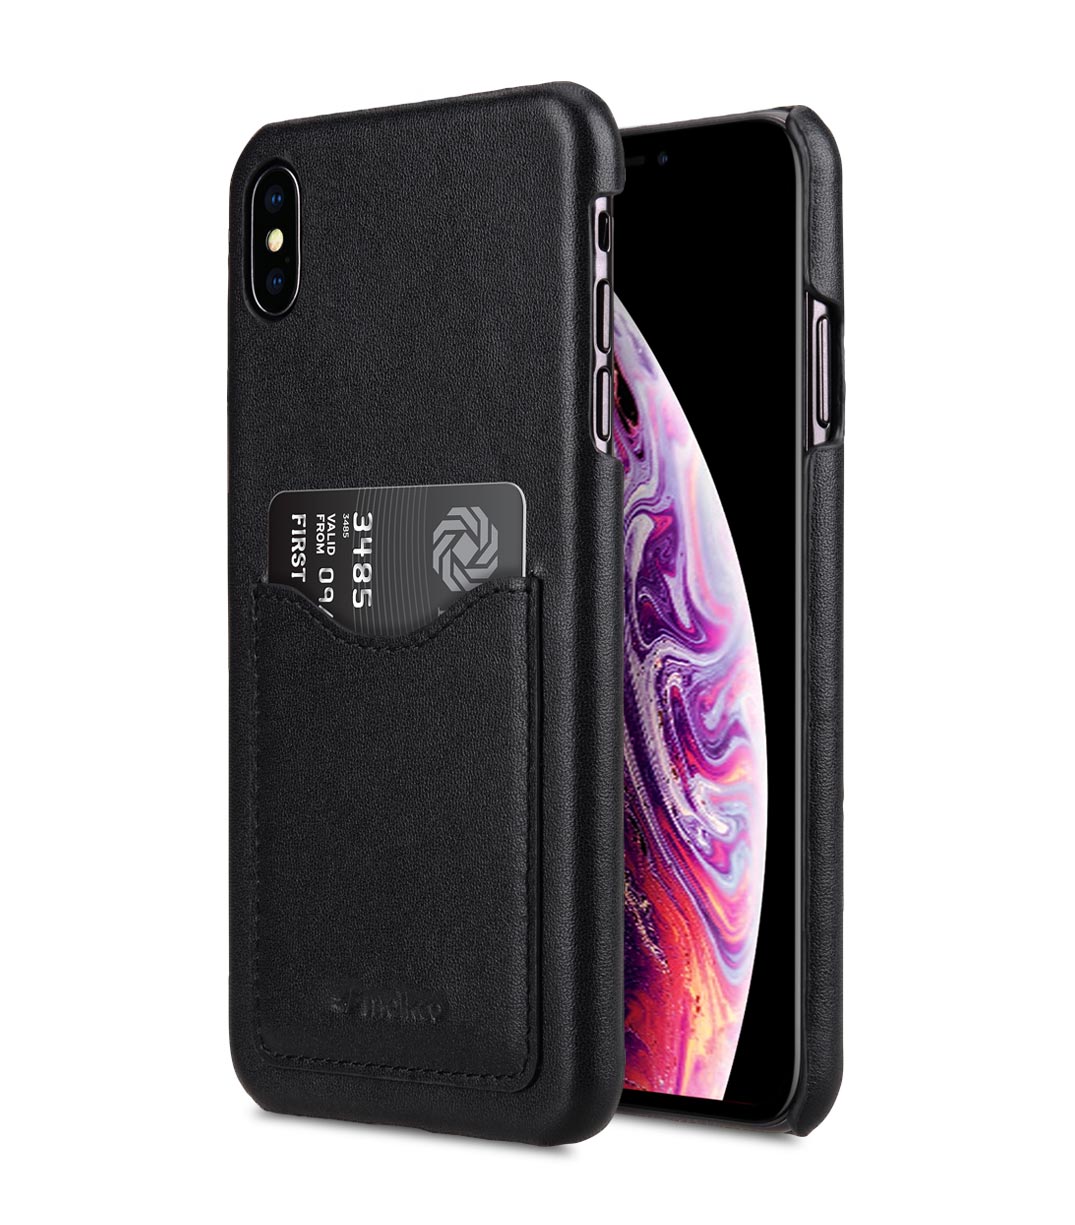 iPhone Xs Max Flip Case Cover for iPhone Xs Max Leather Cell Phone case Extra-Shockproof Business Kickstand Card Holders with Free Waterproof-Bag Grey6 